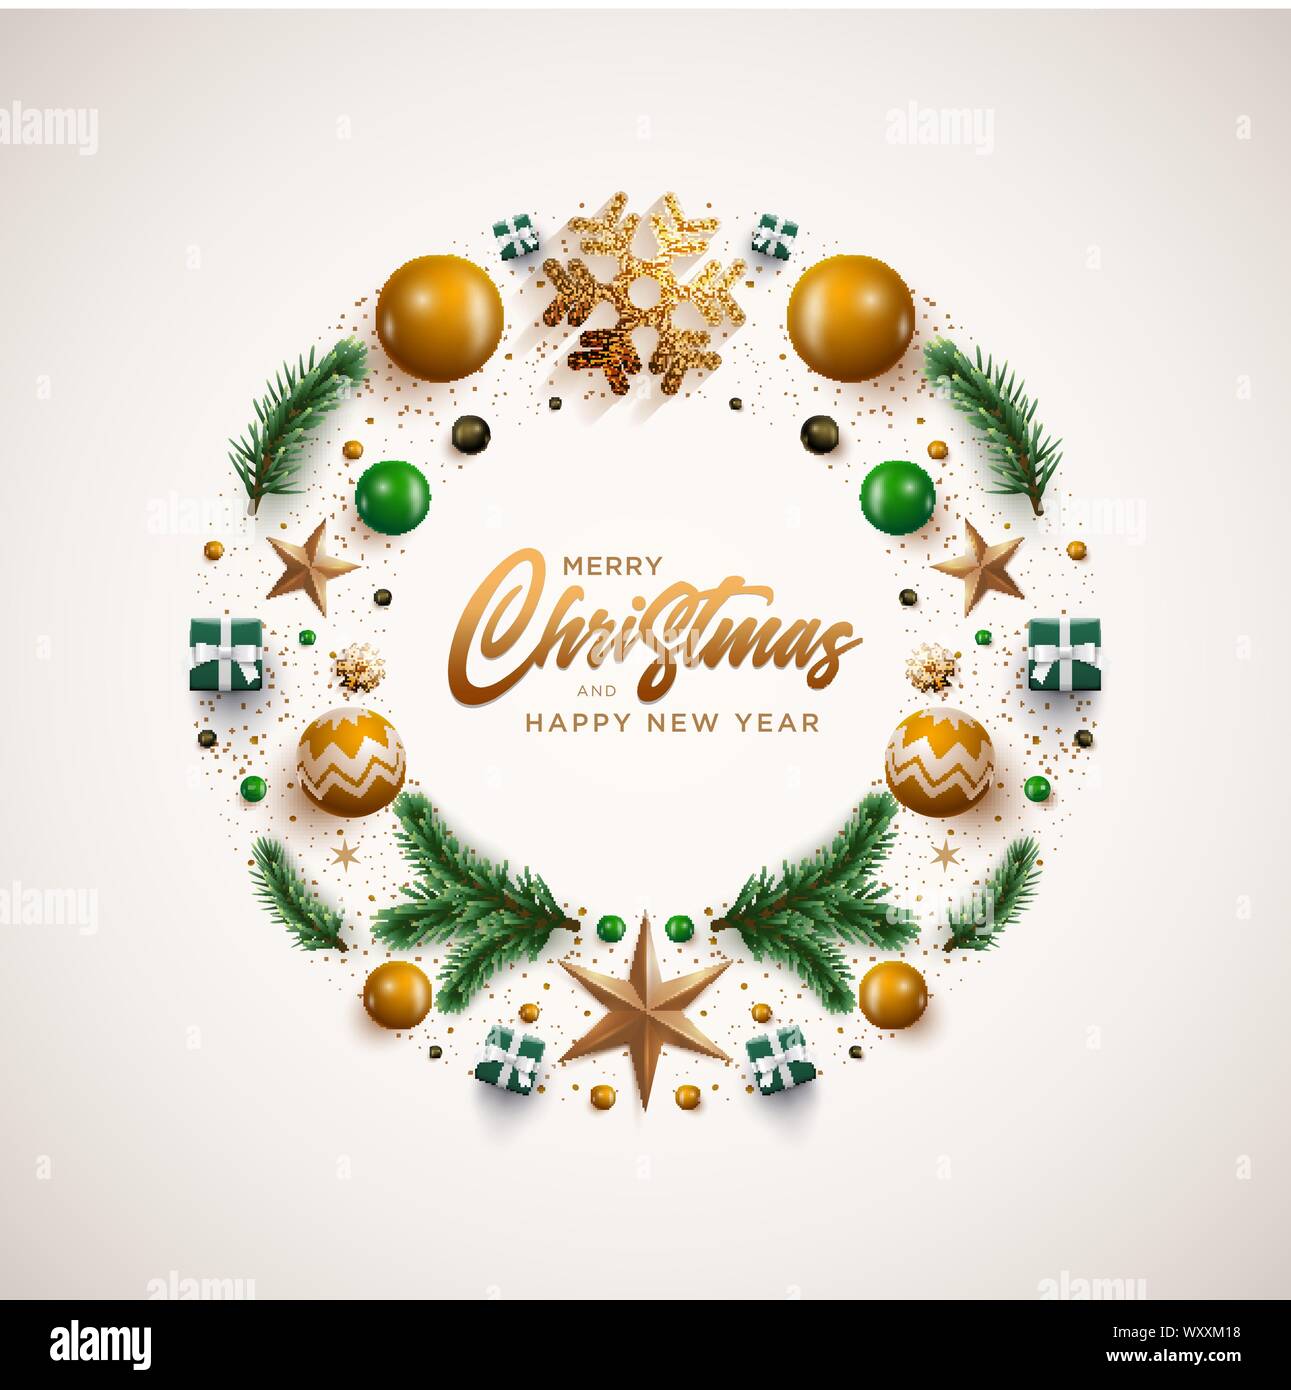 Ho Ho Ho Merry Christmas And Happy New Year Greeting Card Christmas Wreath  Design With Festive Christmas Decoration Ornaments And Objects Vector  Illustration Stock Illustration - Download Image Now - iStock